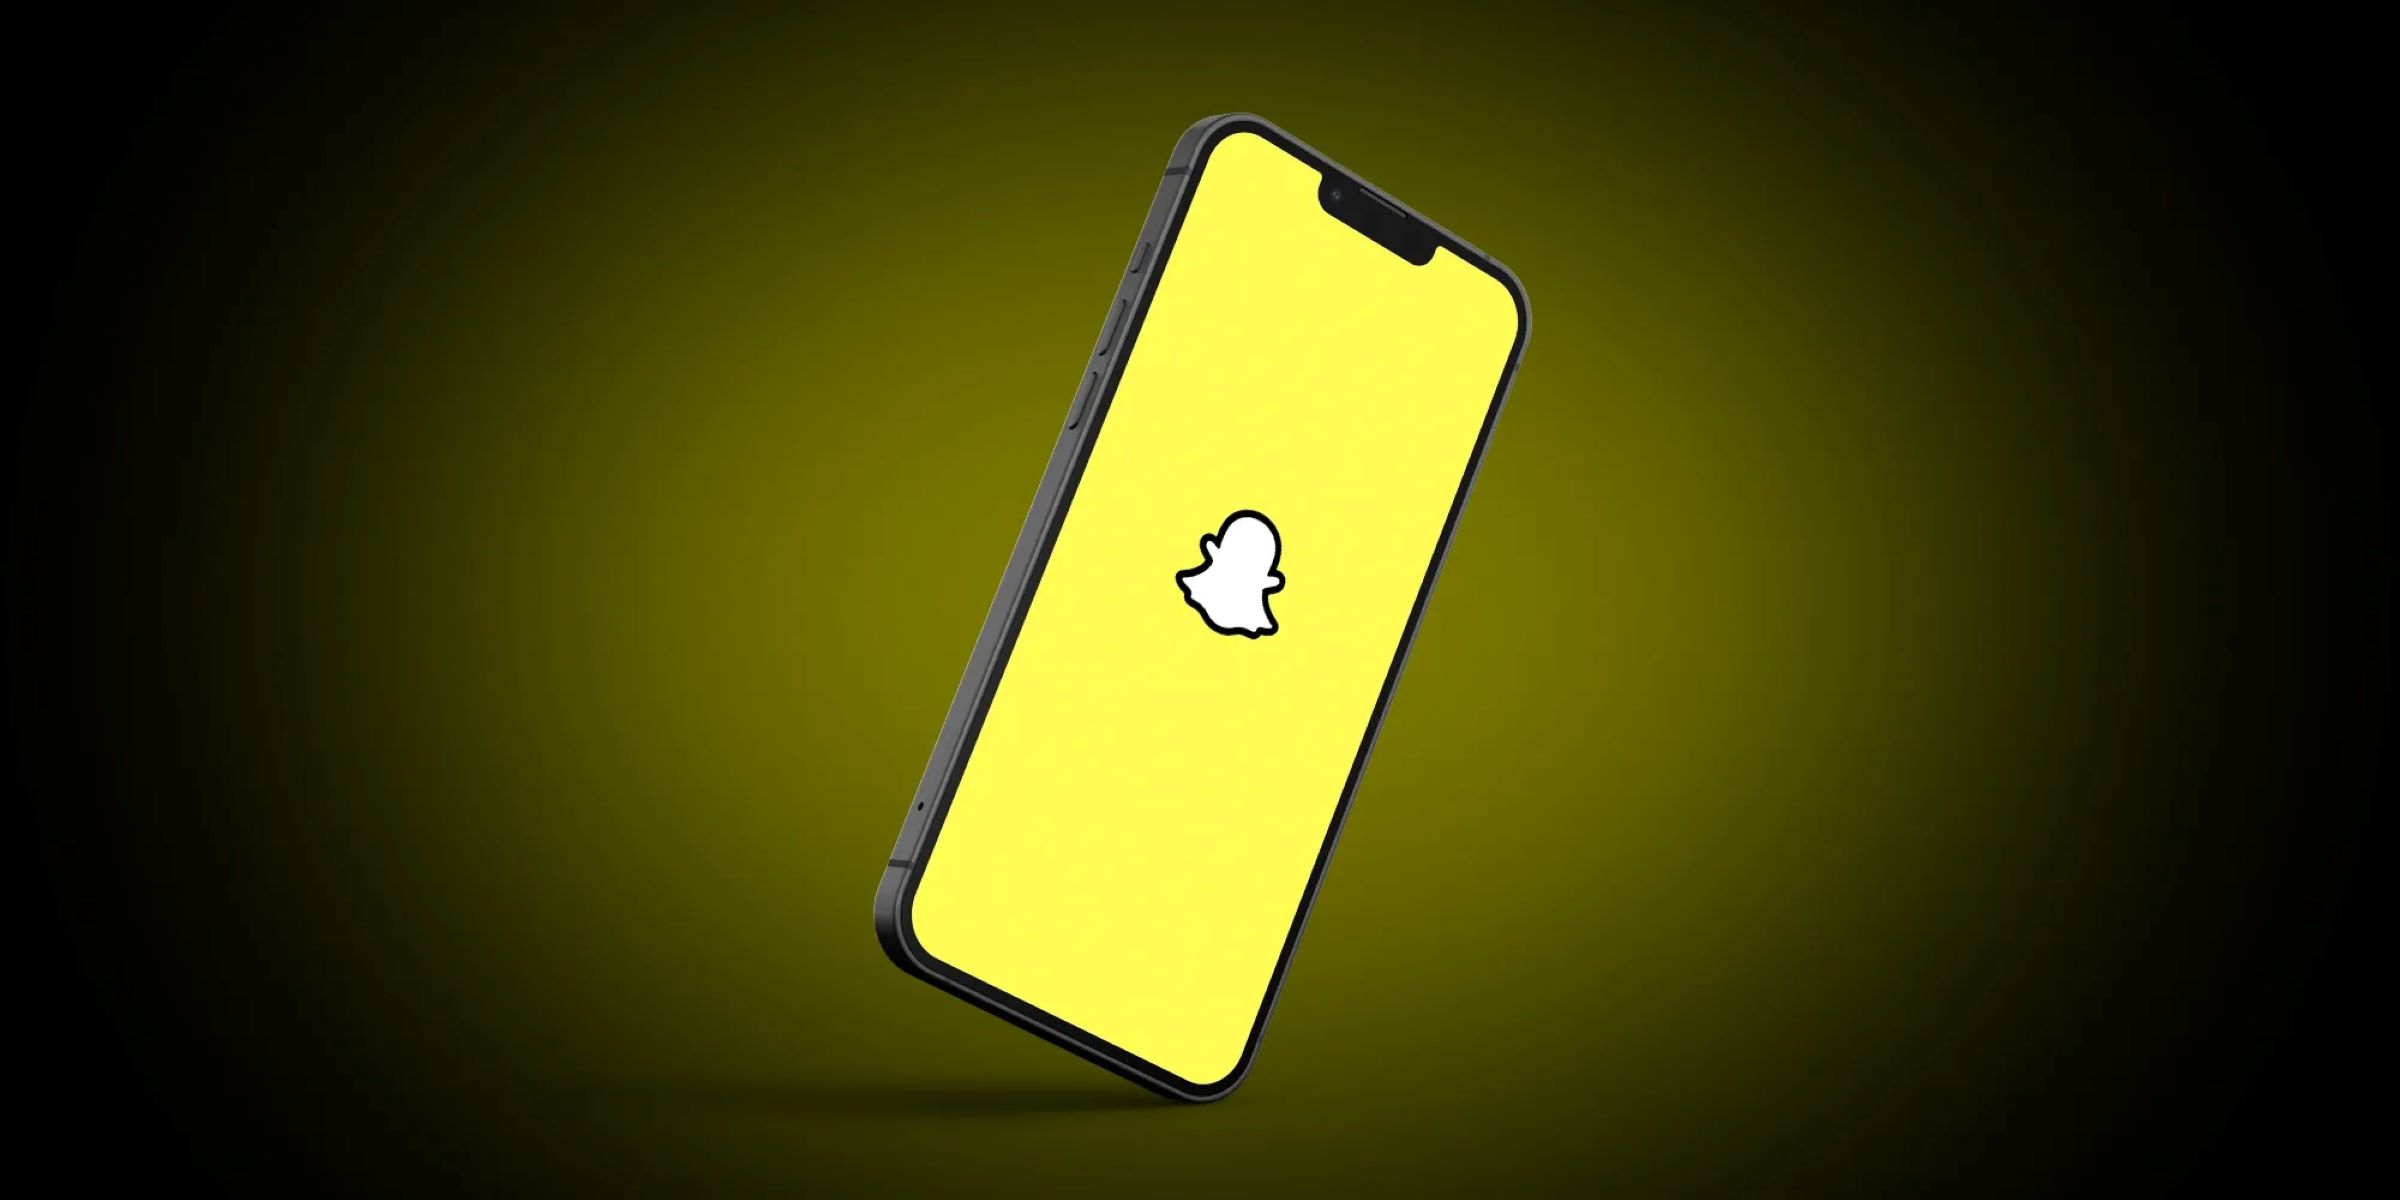 The Ultimate Hack To Know If You've Been Blocked On Snapchat!